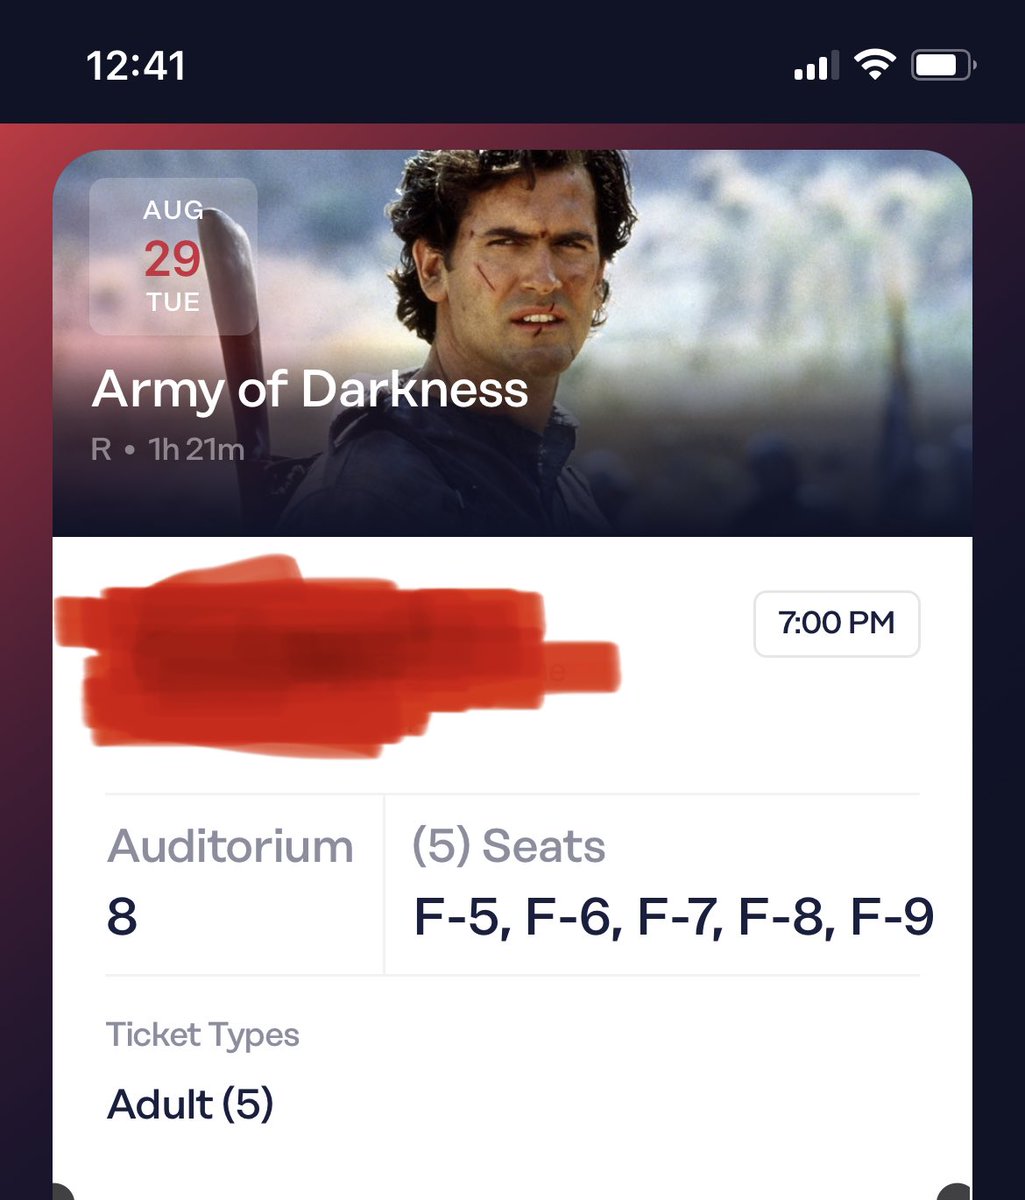 I LOVE MY THEATER IM SCREAMING #ArmyofDarkness #EvilDead